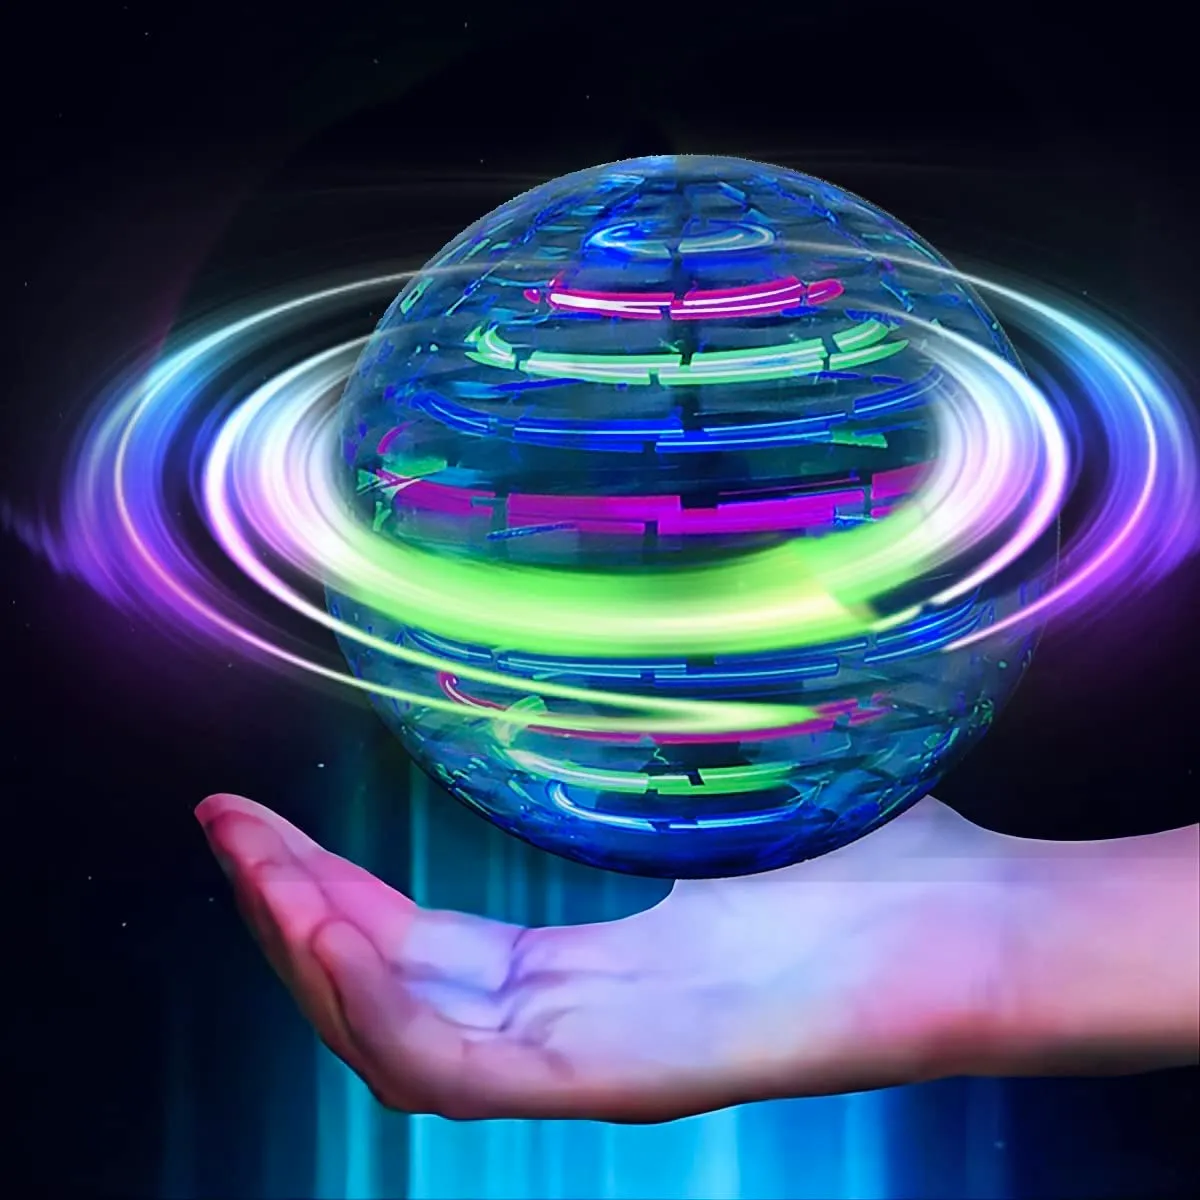 flying ball orb hover ball flying toys for kids adults flying orb magic with led light 360ﾰrotating outdoor indoor hot toys for birthday christmas 2021 b